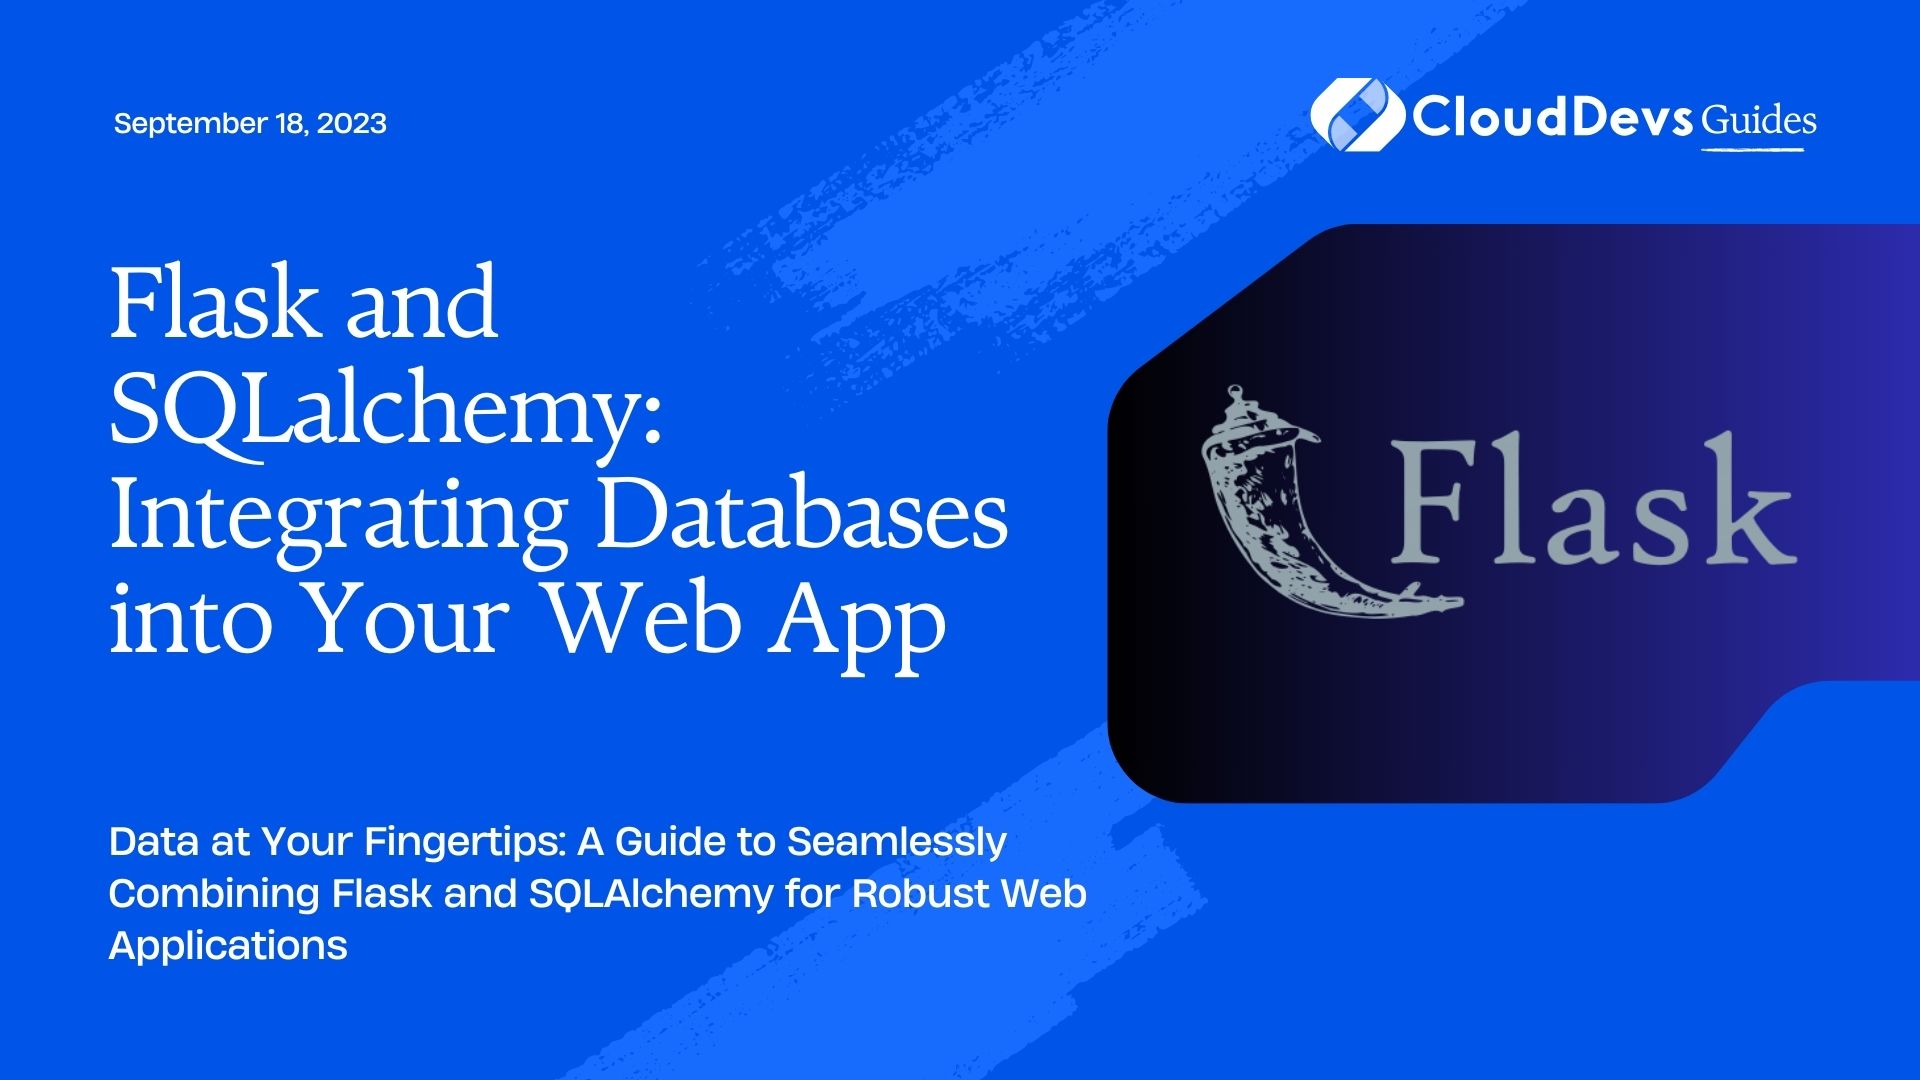 Flask and SQLalchemy: Integrating Databases into Your Web App